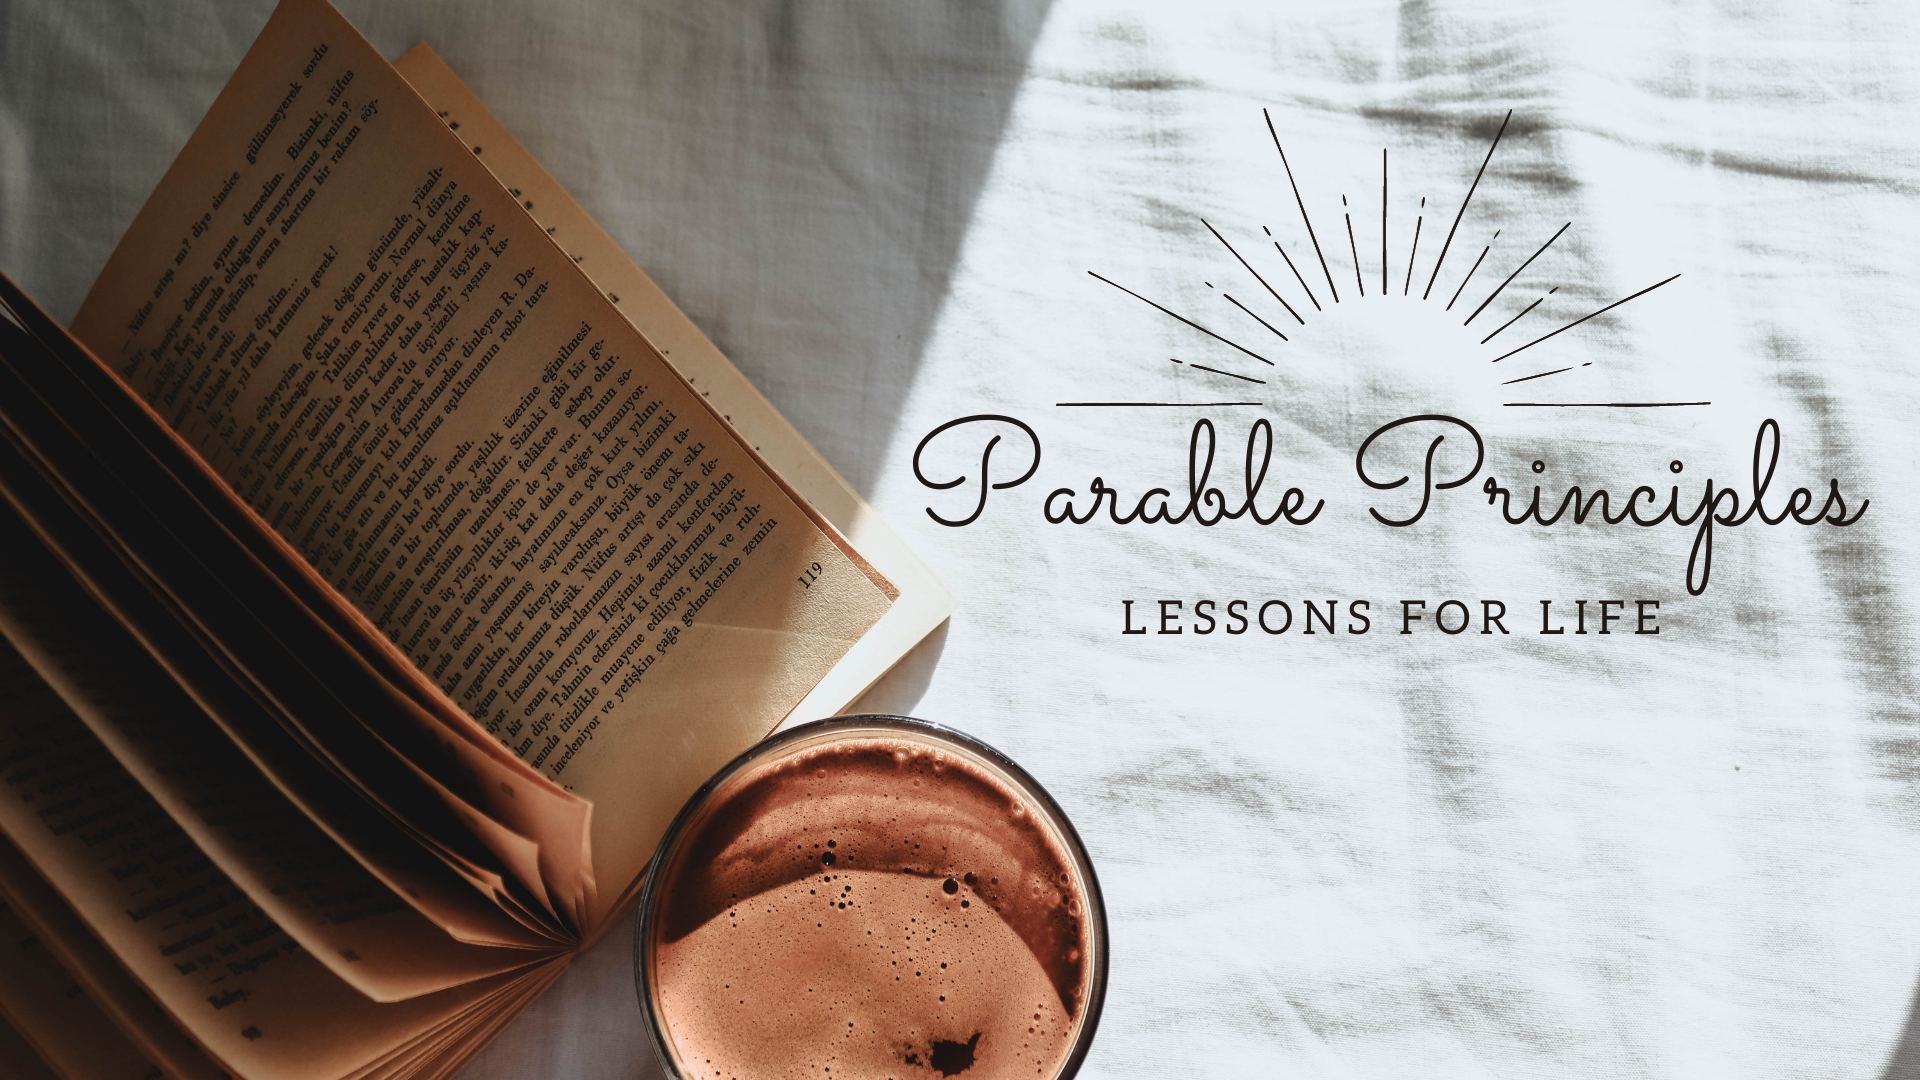 Principles from the Parables – “The Sheep and the Goats”